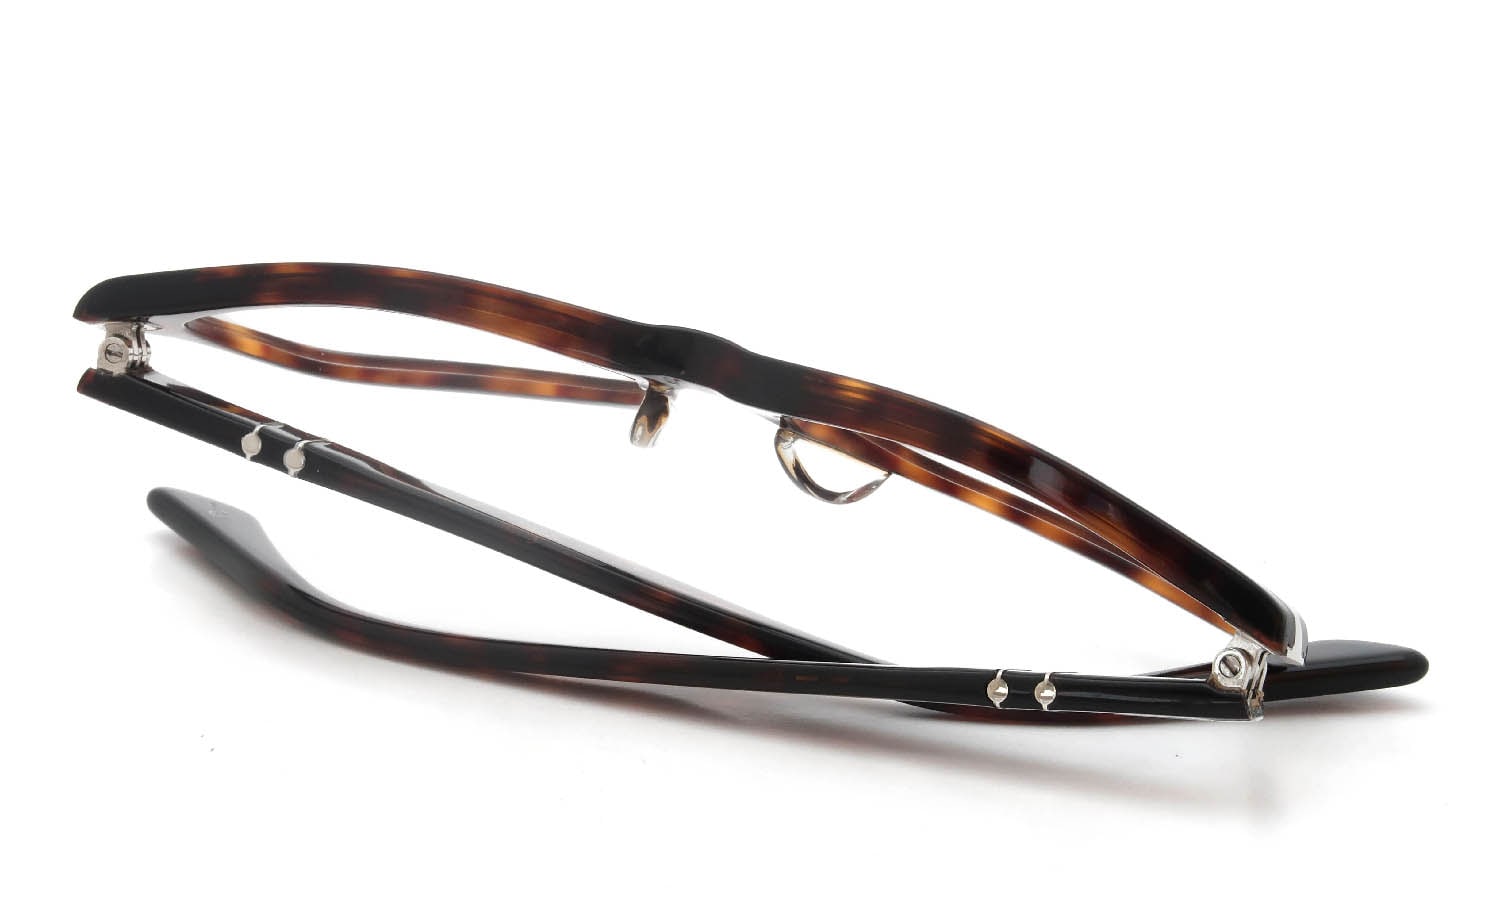 Persol 3078-V 24 55size